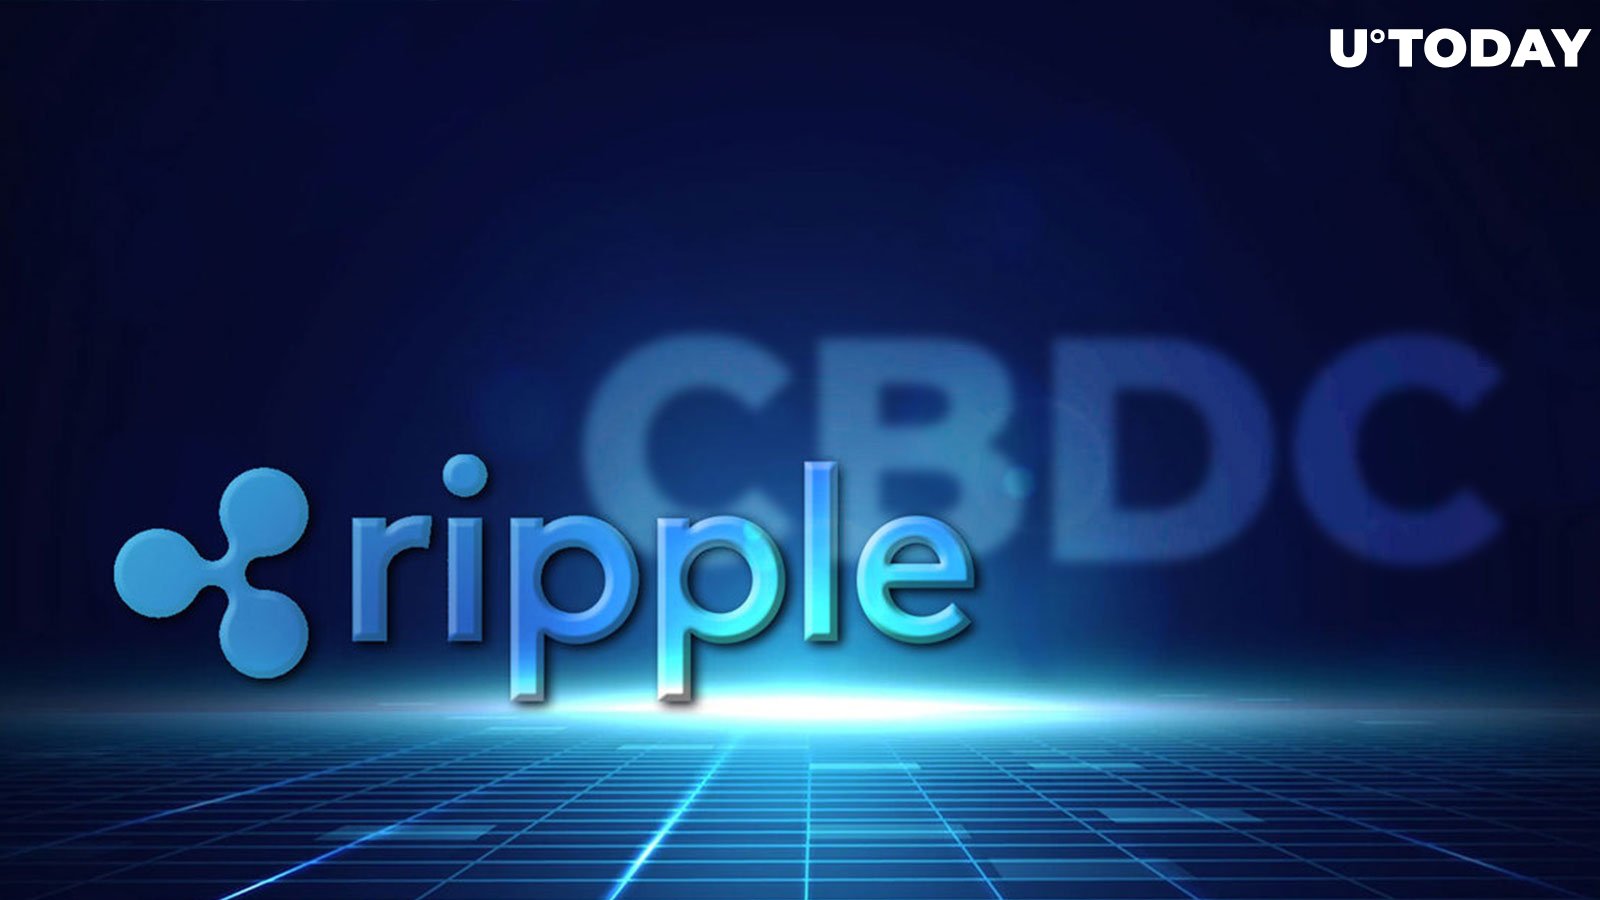 Ripple Partners With Industry Titans in Major Giveaway to Fuel CBDC Innovations